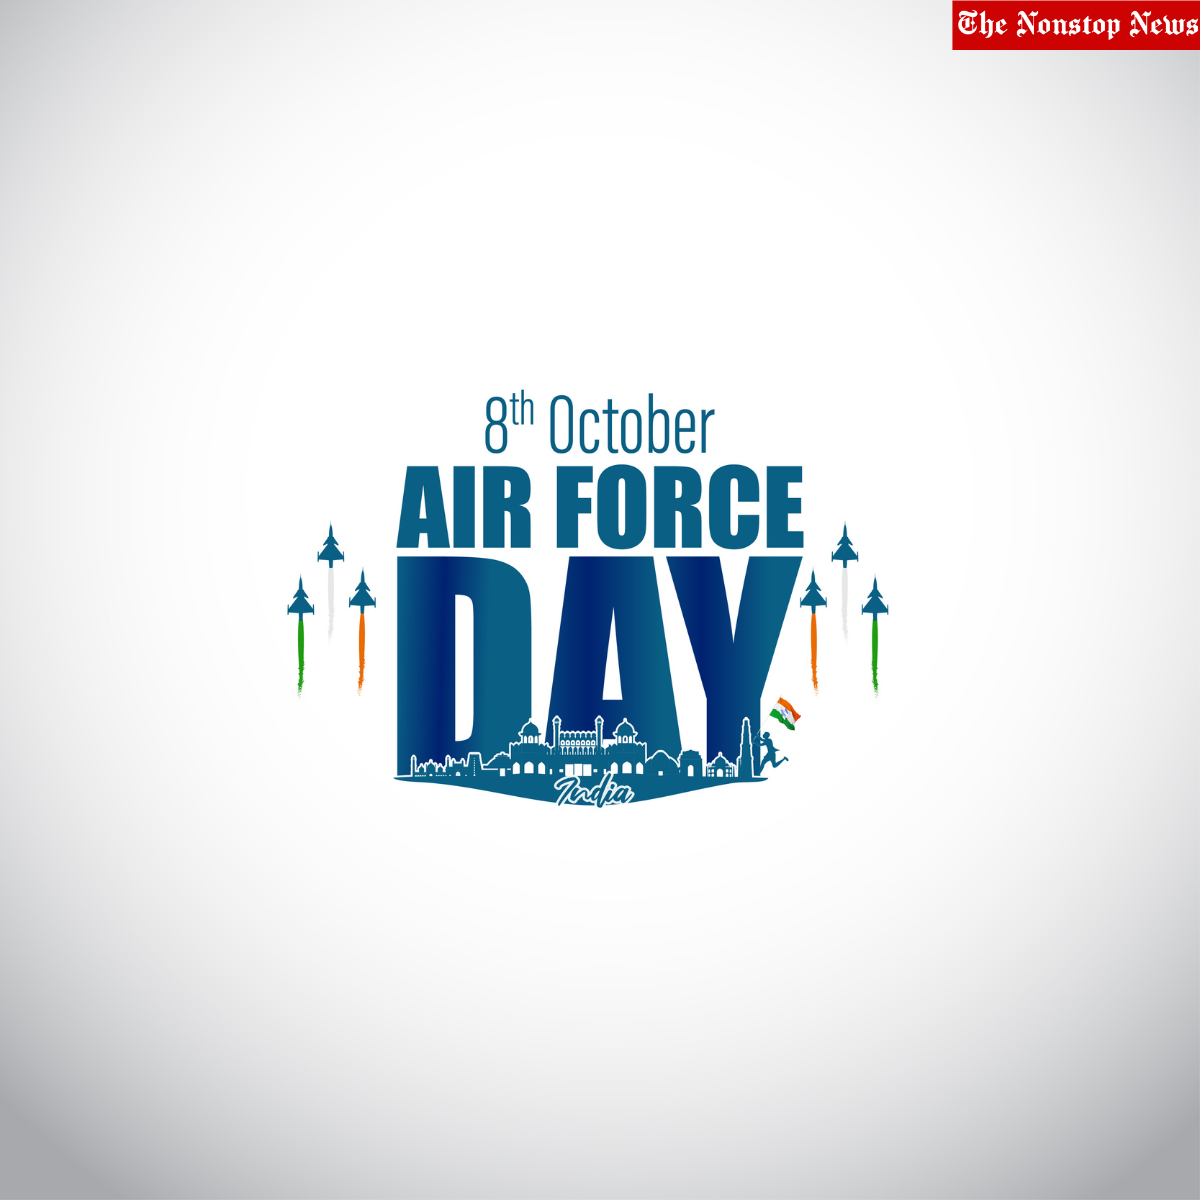 Indian Air Force Day 2022 Wishes, Quotes, Messages, HD Images, Wallpapers, Greetings, Posters, Instagram Captions, Shayari, and Slogans